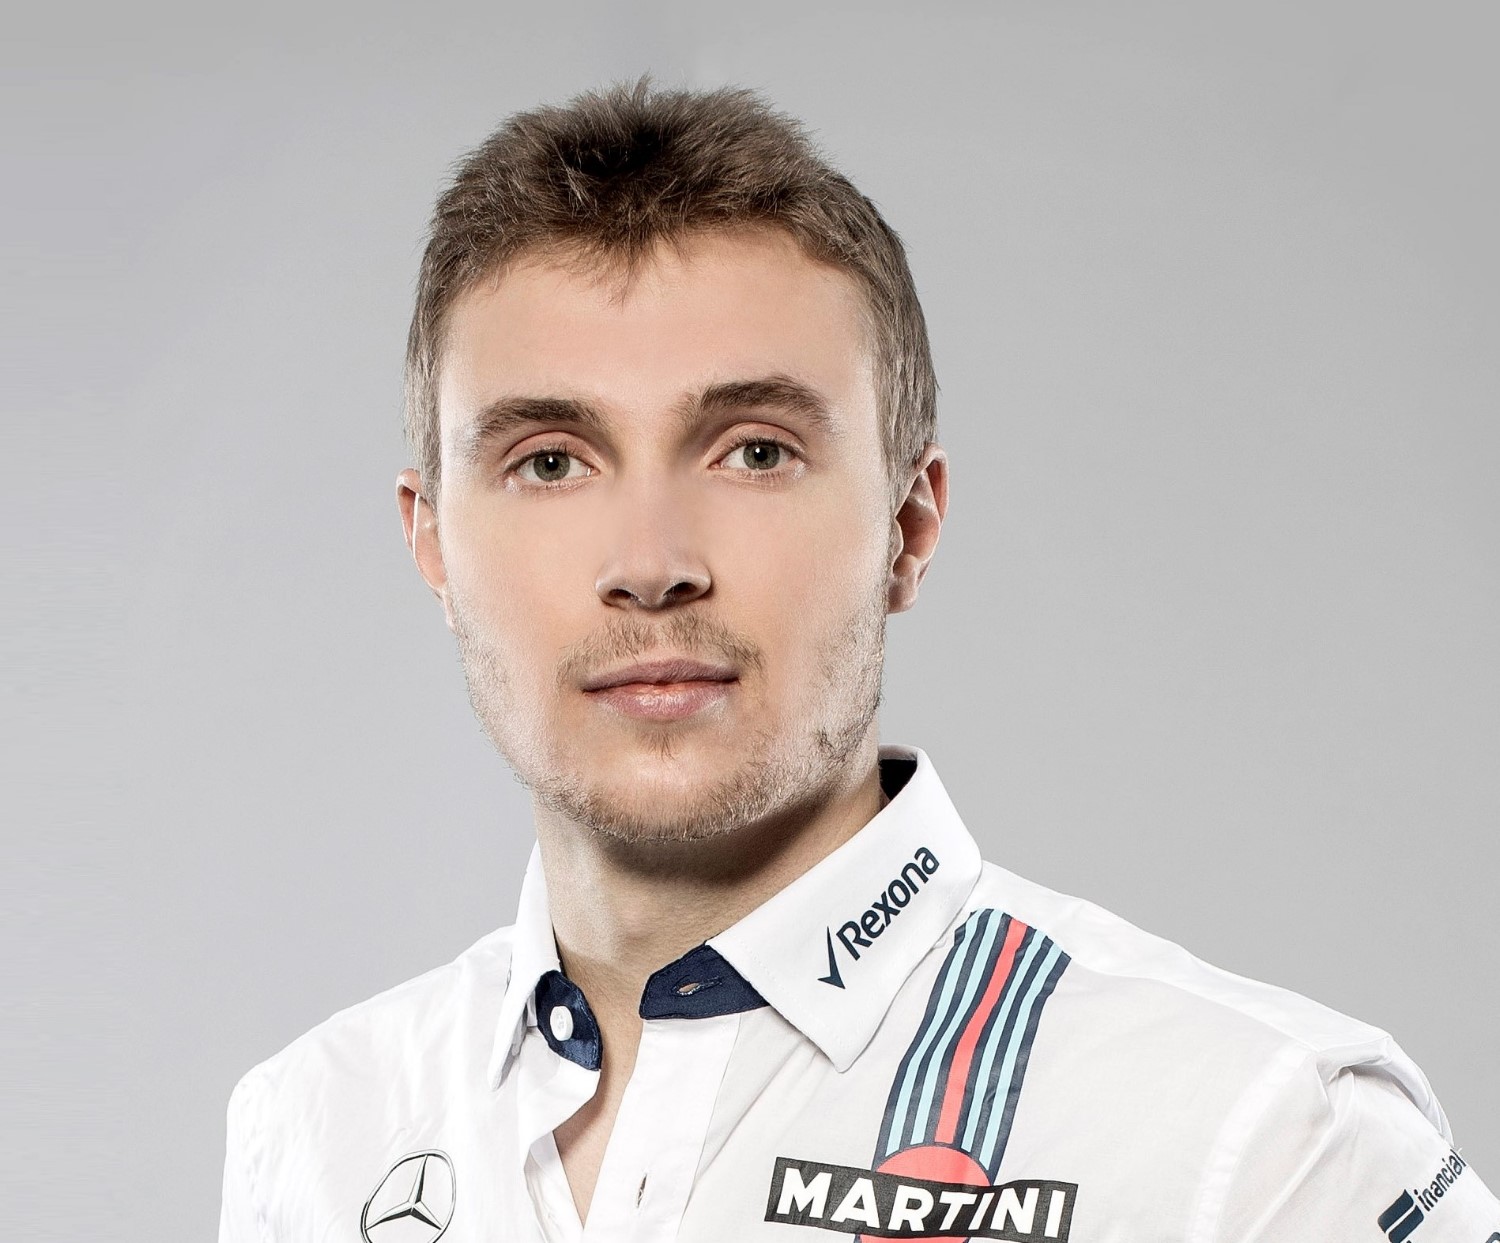 Sergey Sirotkin bought his ride with a check greater than $20 million